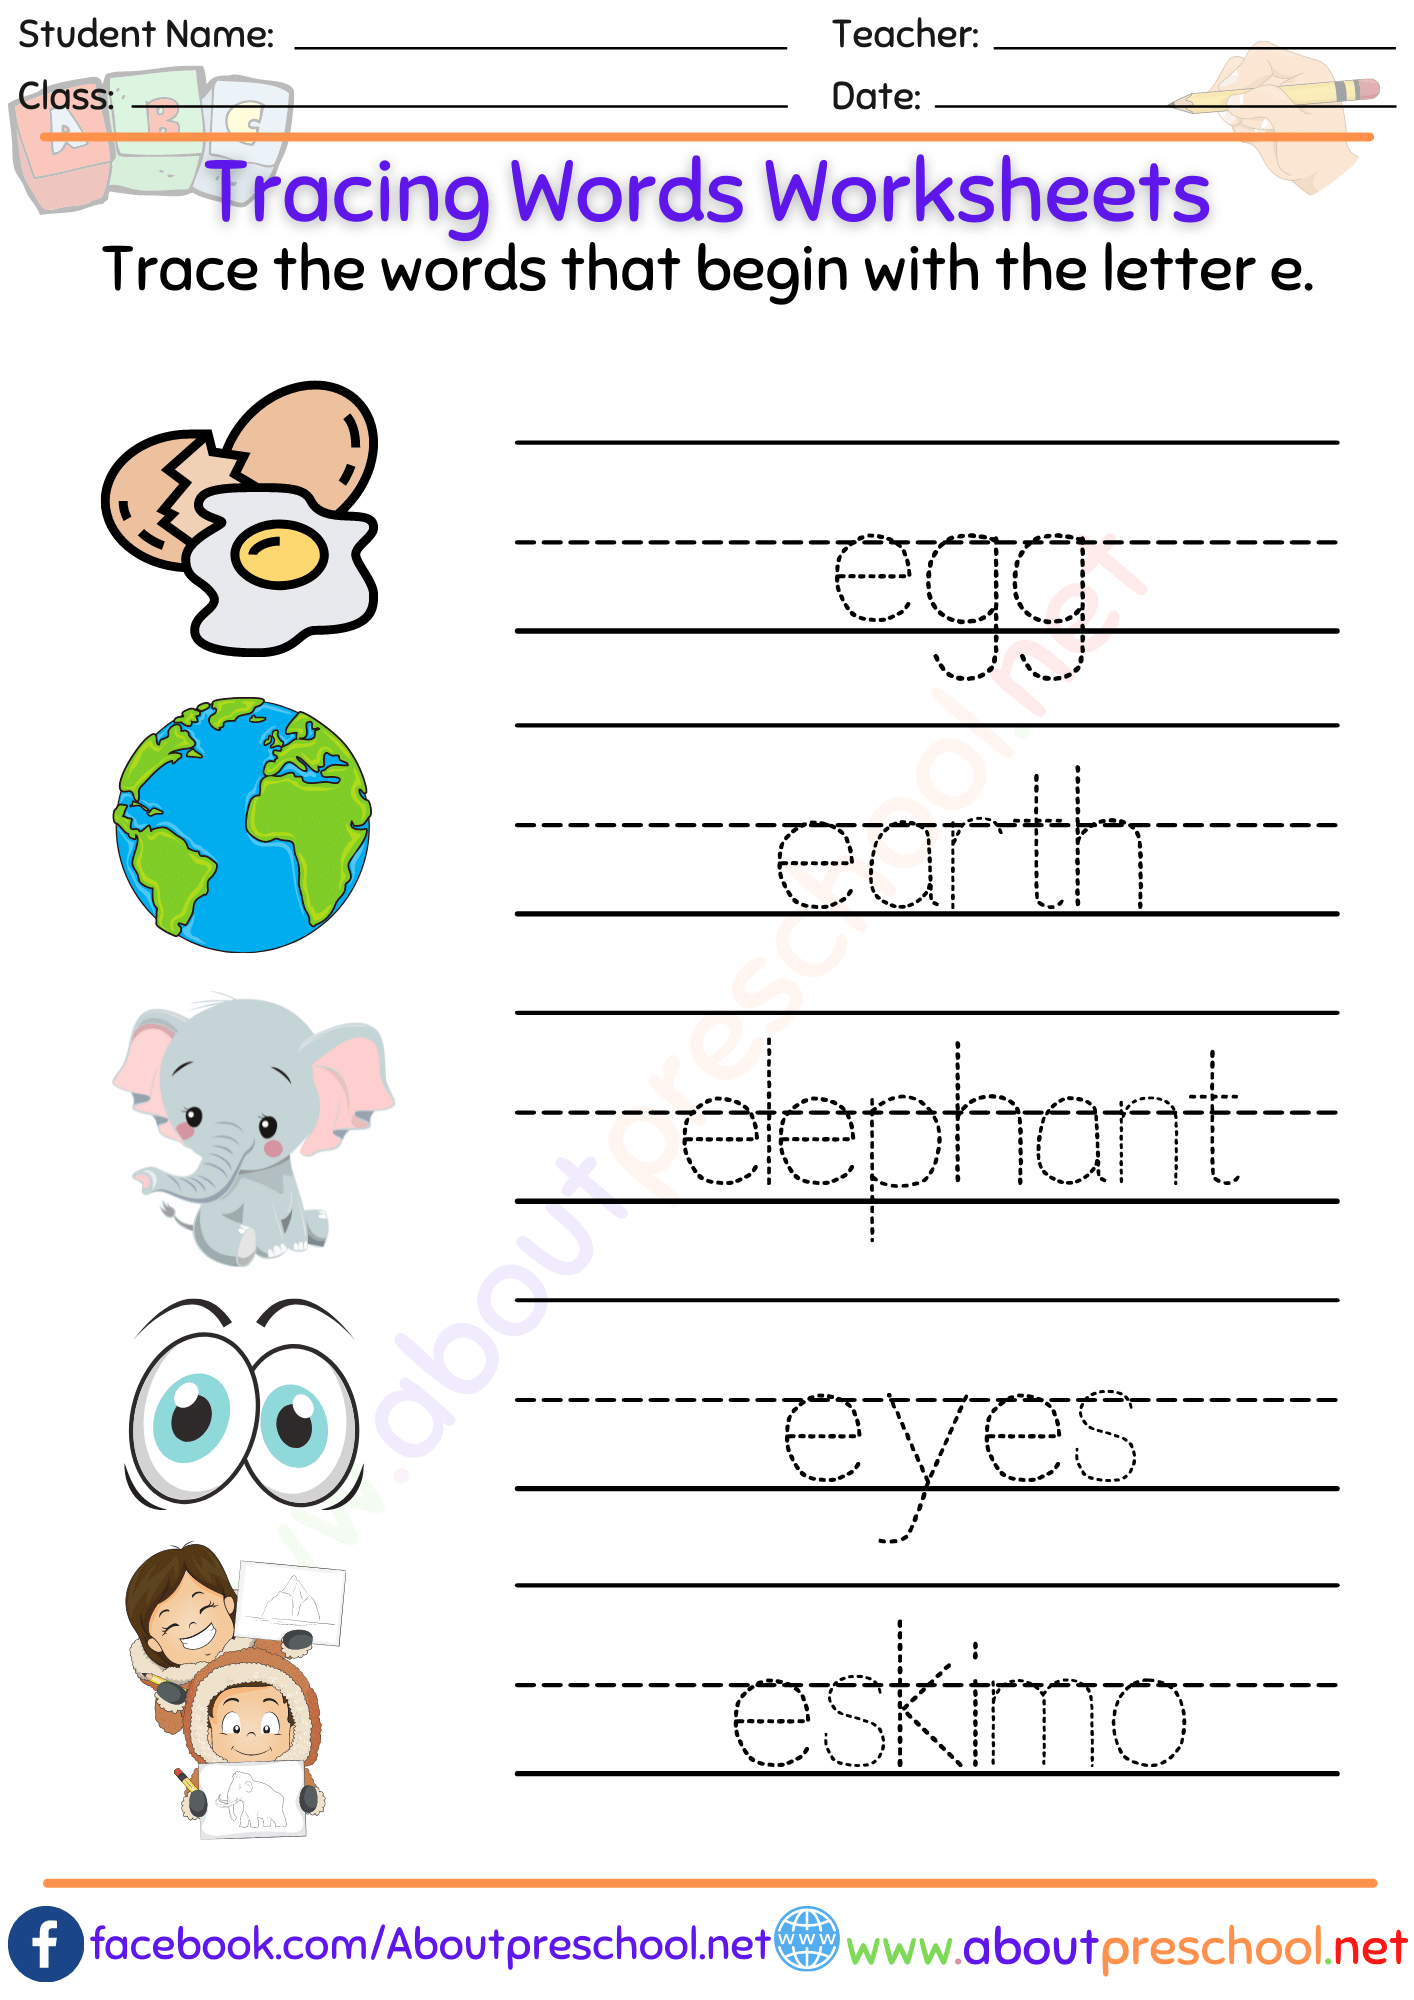 Tracing Words Worksheets-e